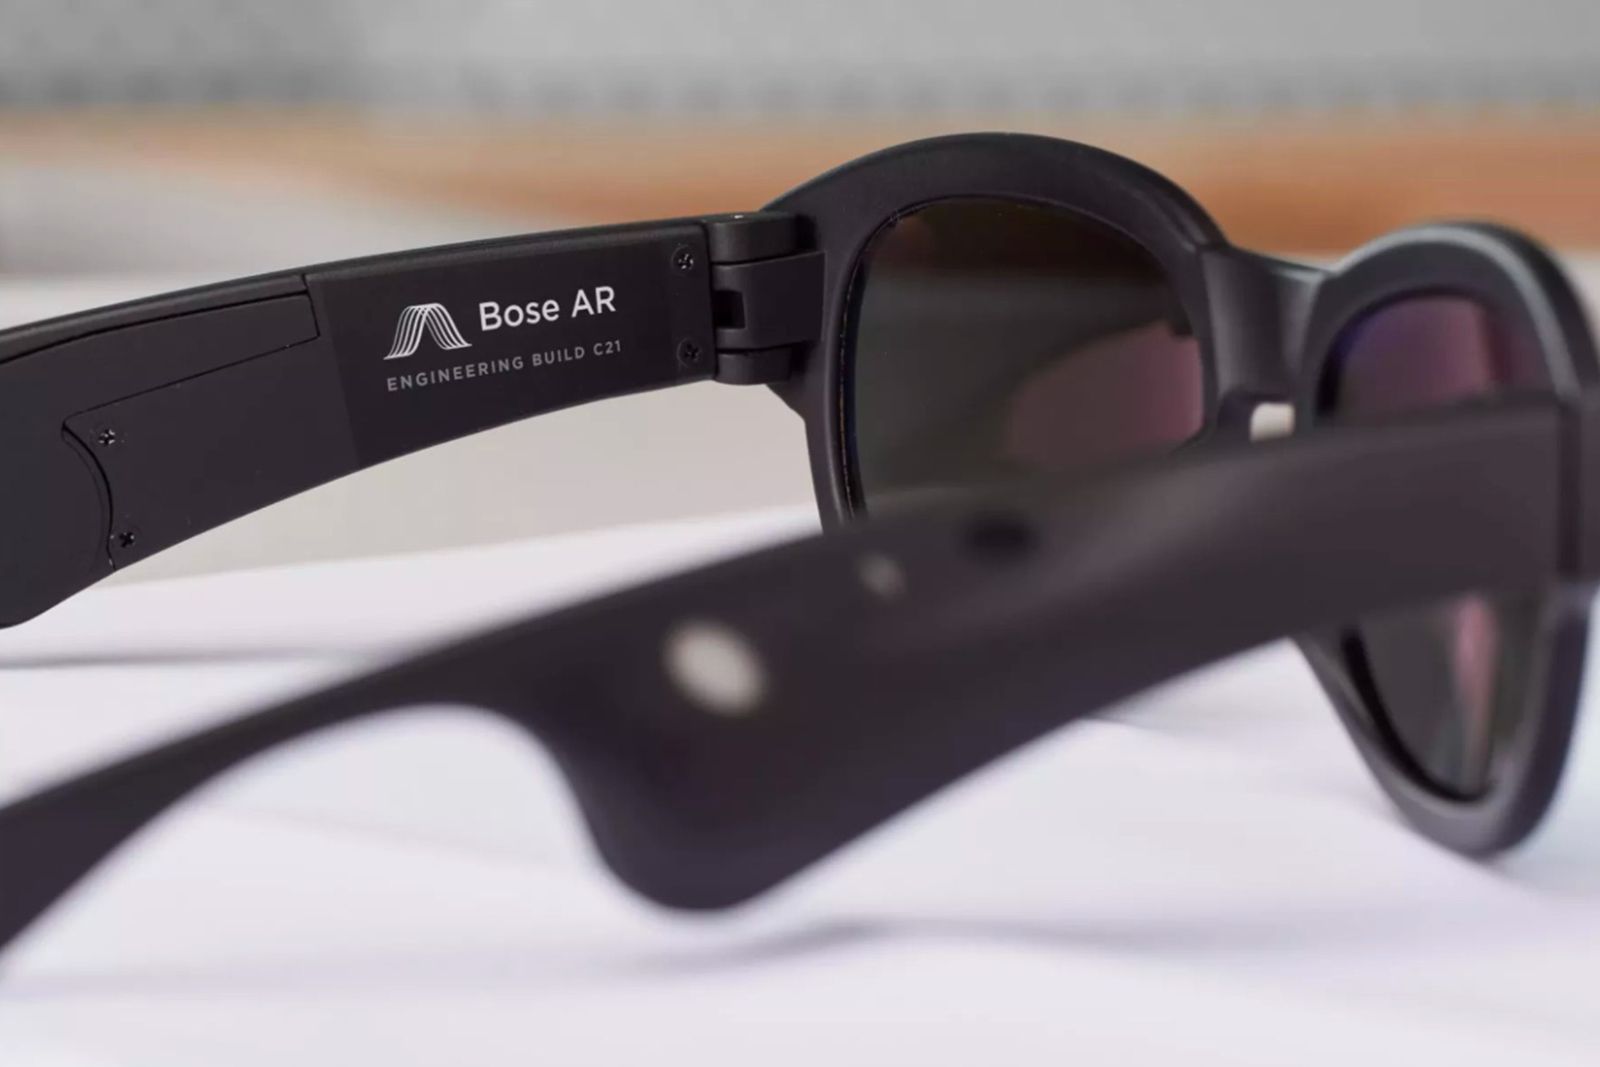 Bose shows off AR glasses designed to augment your world with sound image 1